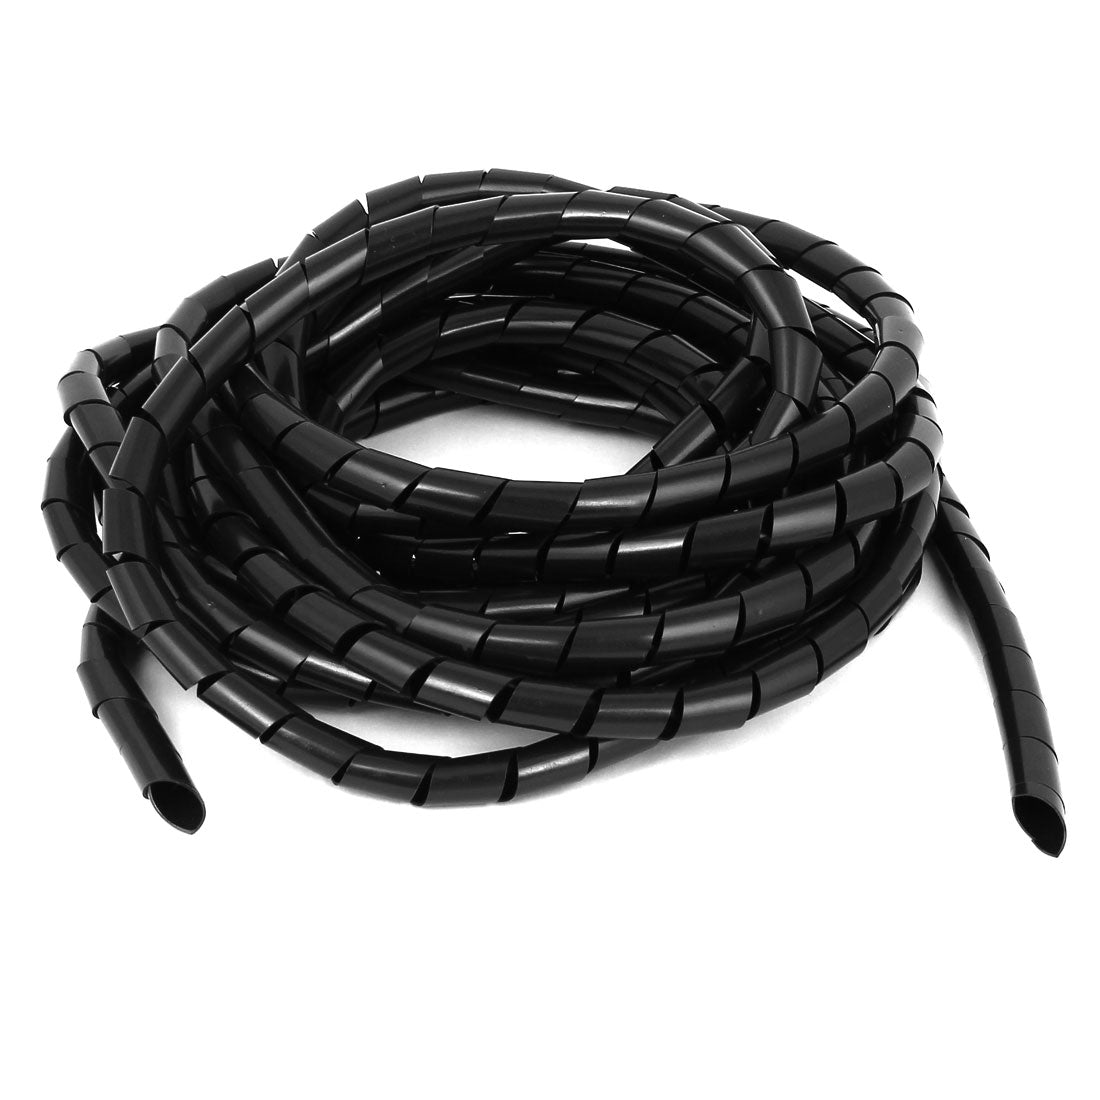 uxcell Uxcell Cable Wire Tidy Spiral Wrapping Band PC Cinema TV Management Organizer 6M 20Ft